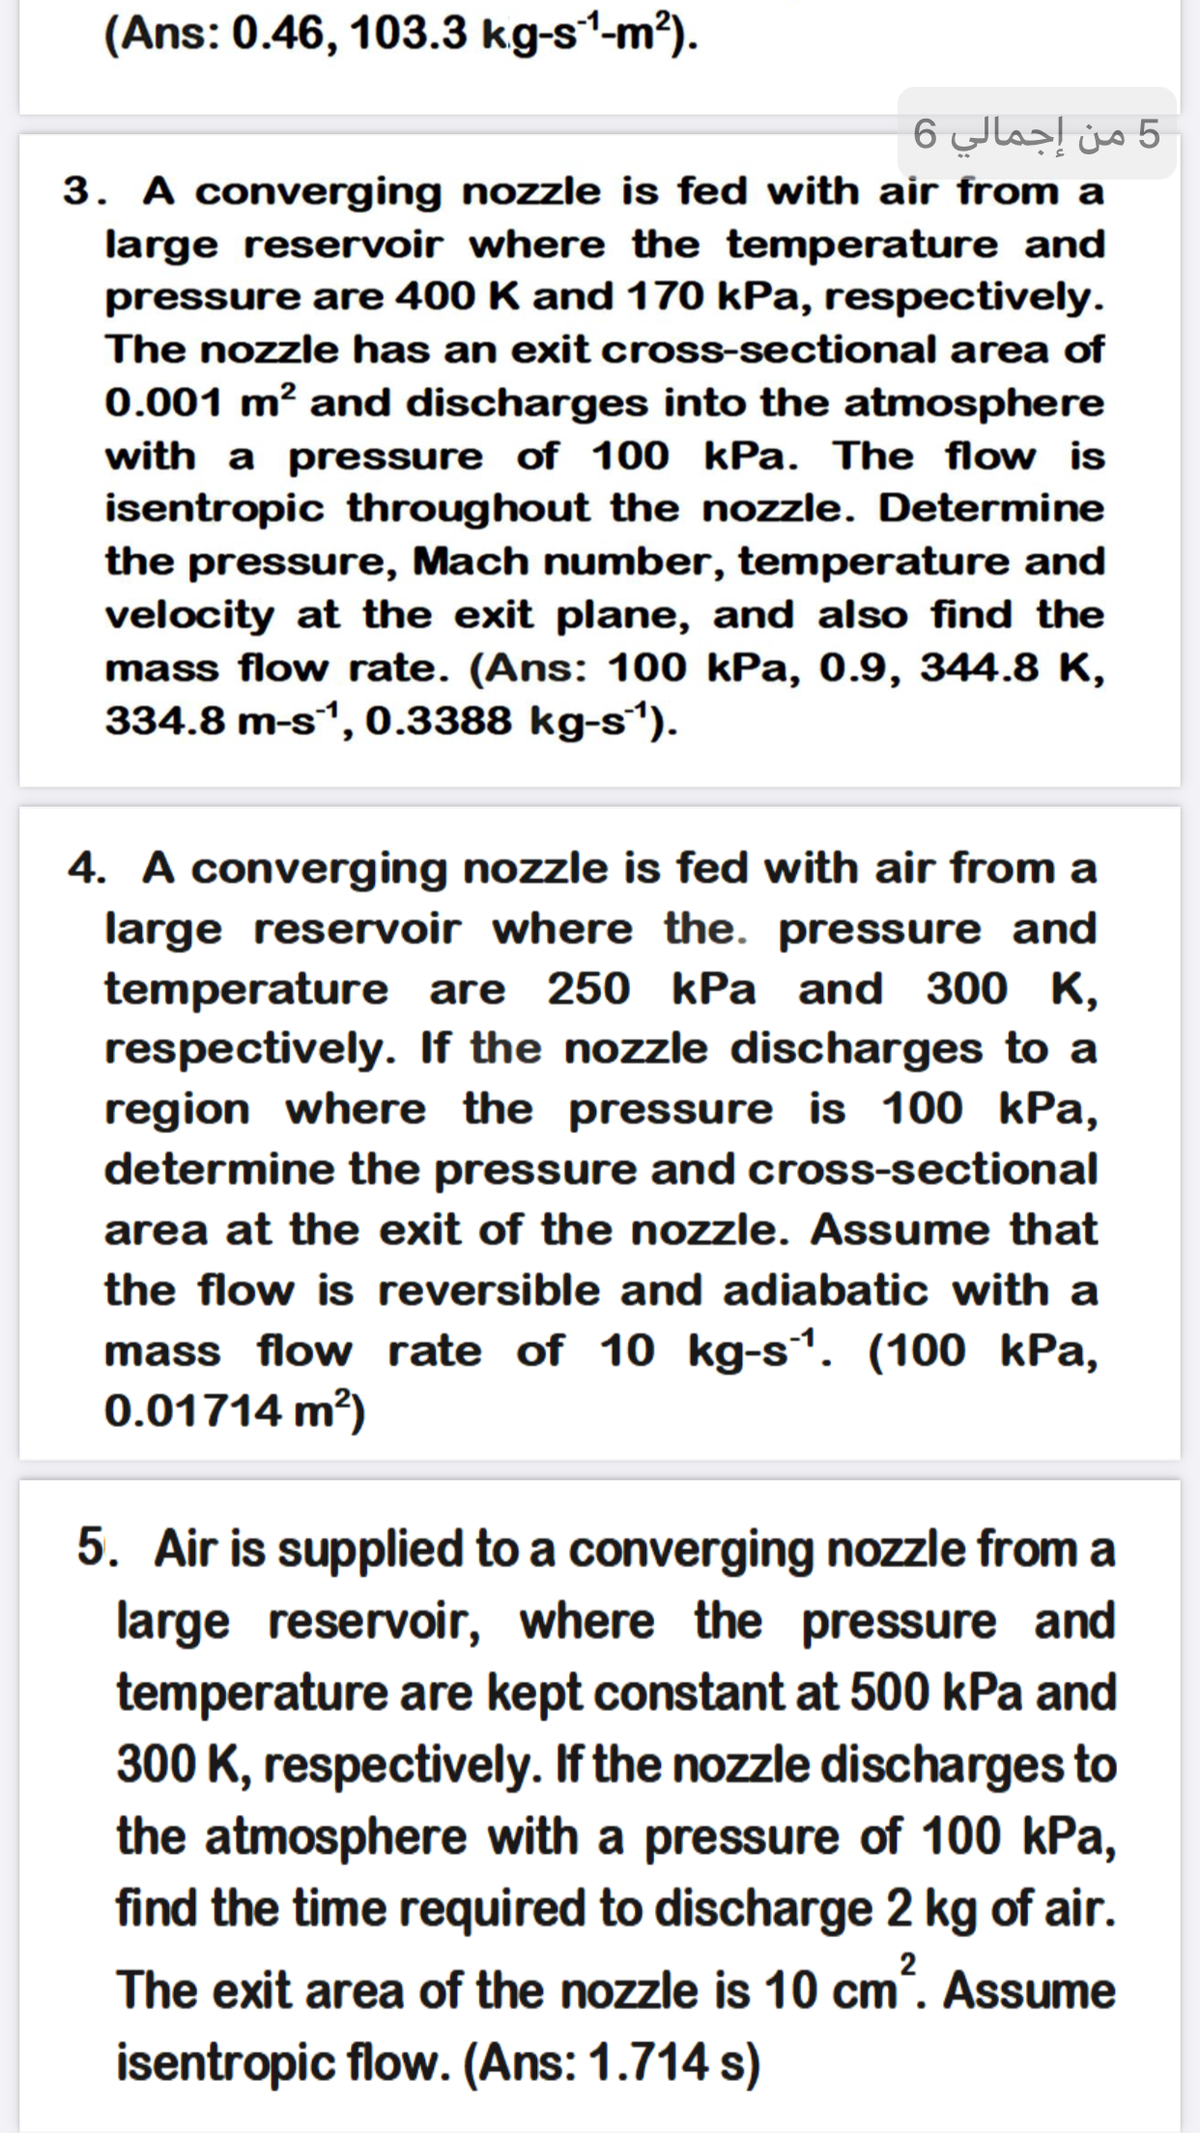 (Ans: 0.46, 103.3 kg-s1-m?).
5 من إجمالي 6
3. A converging nozzle is fed with air from a
large reservoir where the temperature and
pressure are 400 K and 170 kPa, respectively.
The nozzle has an exit cross-sectional area of
0.001 m² and discharges into the atmosphere
with a pressure of 100 kPa. The flow is
isentropic throughout the nozzle. Determine
the pressure, Mach number, temperature and
velocity at the exit plane, and also find the
mass flow rate. (Ans: 100 kPa, 0.9, 344.8 K,
334.8 m-s1, 0.3388 kg-s).
4. A converging nozzle is fed with air from a
large reservoir where the. pressure and
temperature are 250 kPa and 300 K,
respectively. If the nozzle discharges to a
region where the pressure is 100 kPa,
determine the pressure and cross-sectional
area at the exit of the nozzle. Assume that
the flow is reversible and adiabatic with a
mass flow rate of 10 kg-s1. (100 kPa,
0.01714 m?)
5. Air is supplied to a converging nozzle from a
large reservoir, where the pressure and
temperature are kept constant at 500 kPa and
300 K, respectively. If the nozzle discharges to
the atmosphere with a pressure of 100 kPa,
find the time required to discharge 2 kg of air.
2
The exit area of the nozzle is 10 cm". Assume
isentropic flow. (Ans: 1.714 s)
